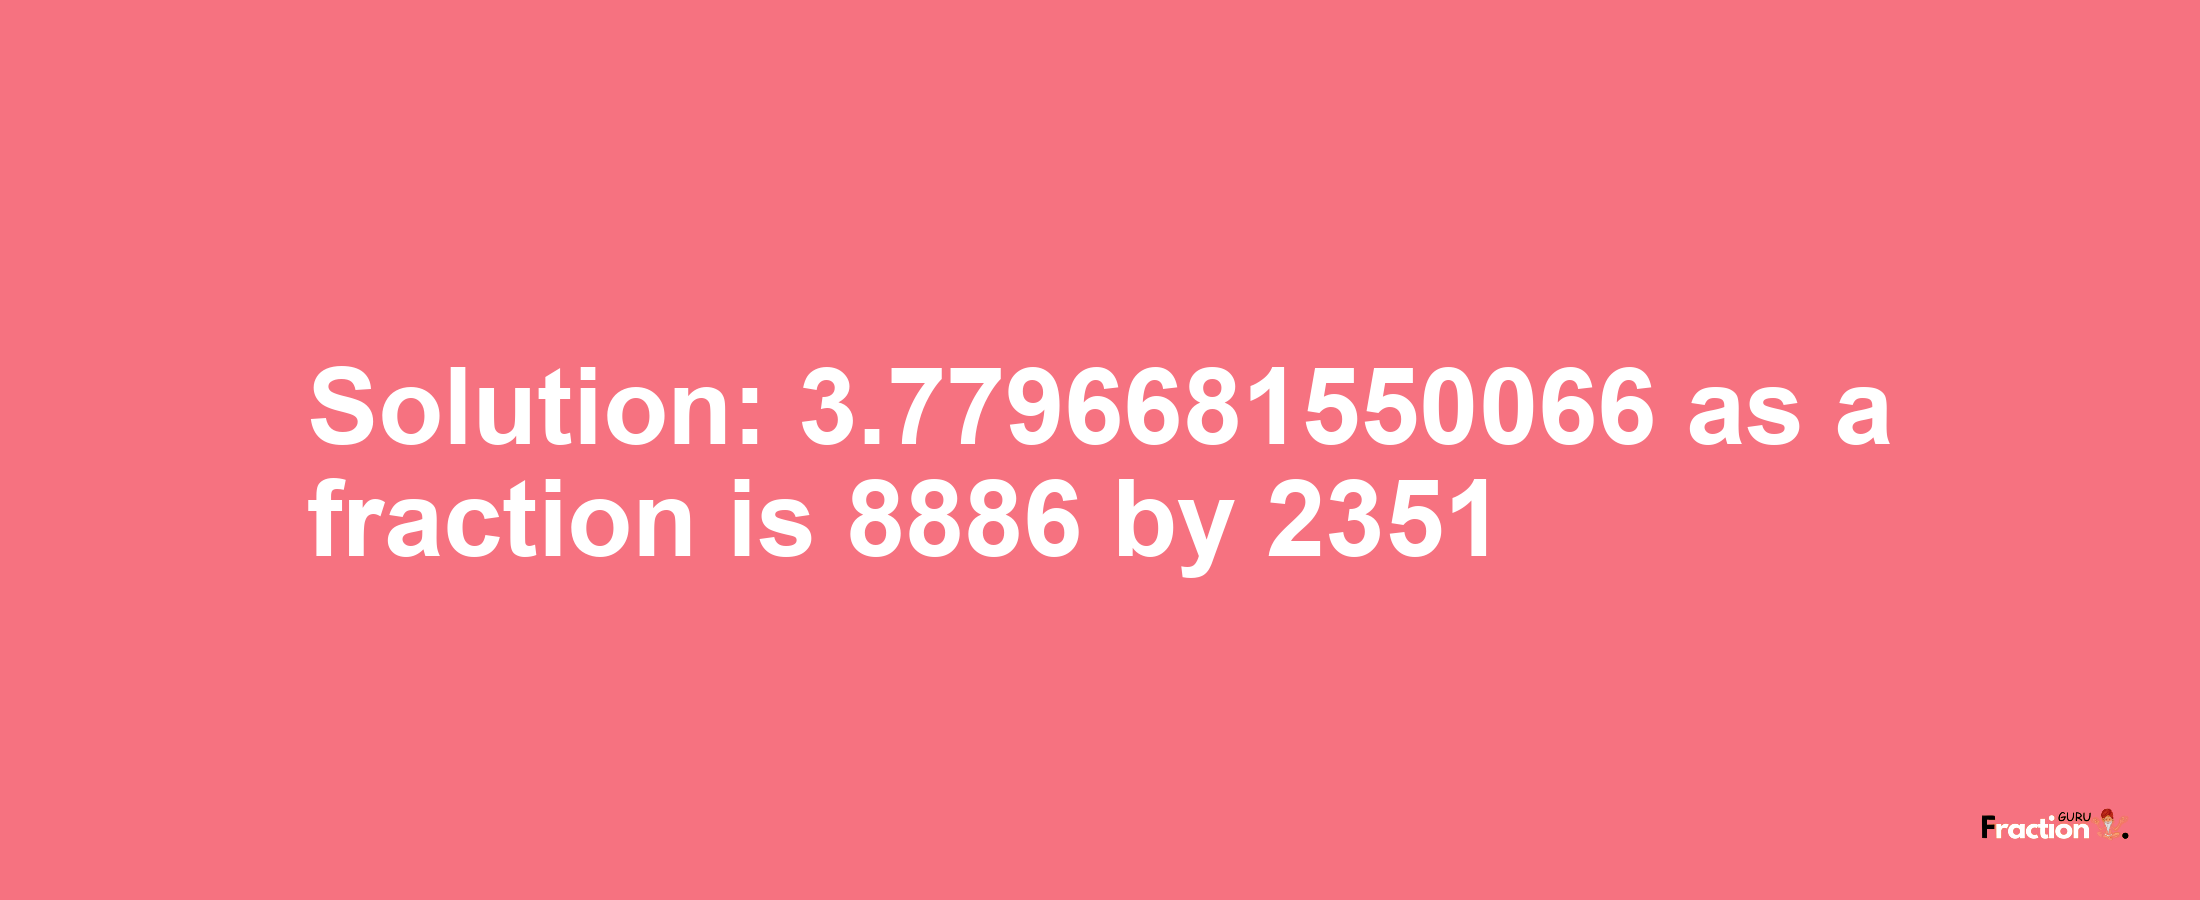 Solution:3.7796681550066 as a fraction is 8886/2351